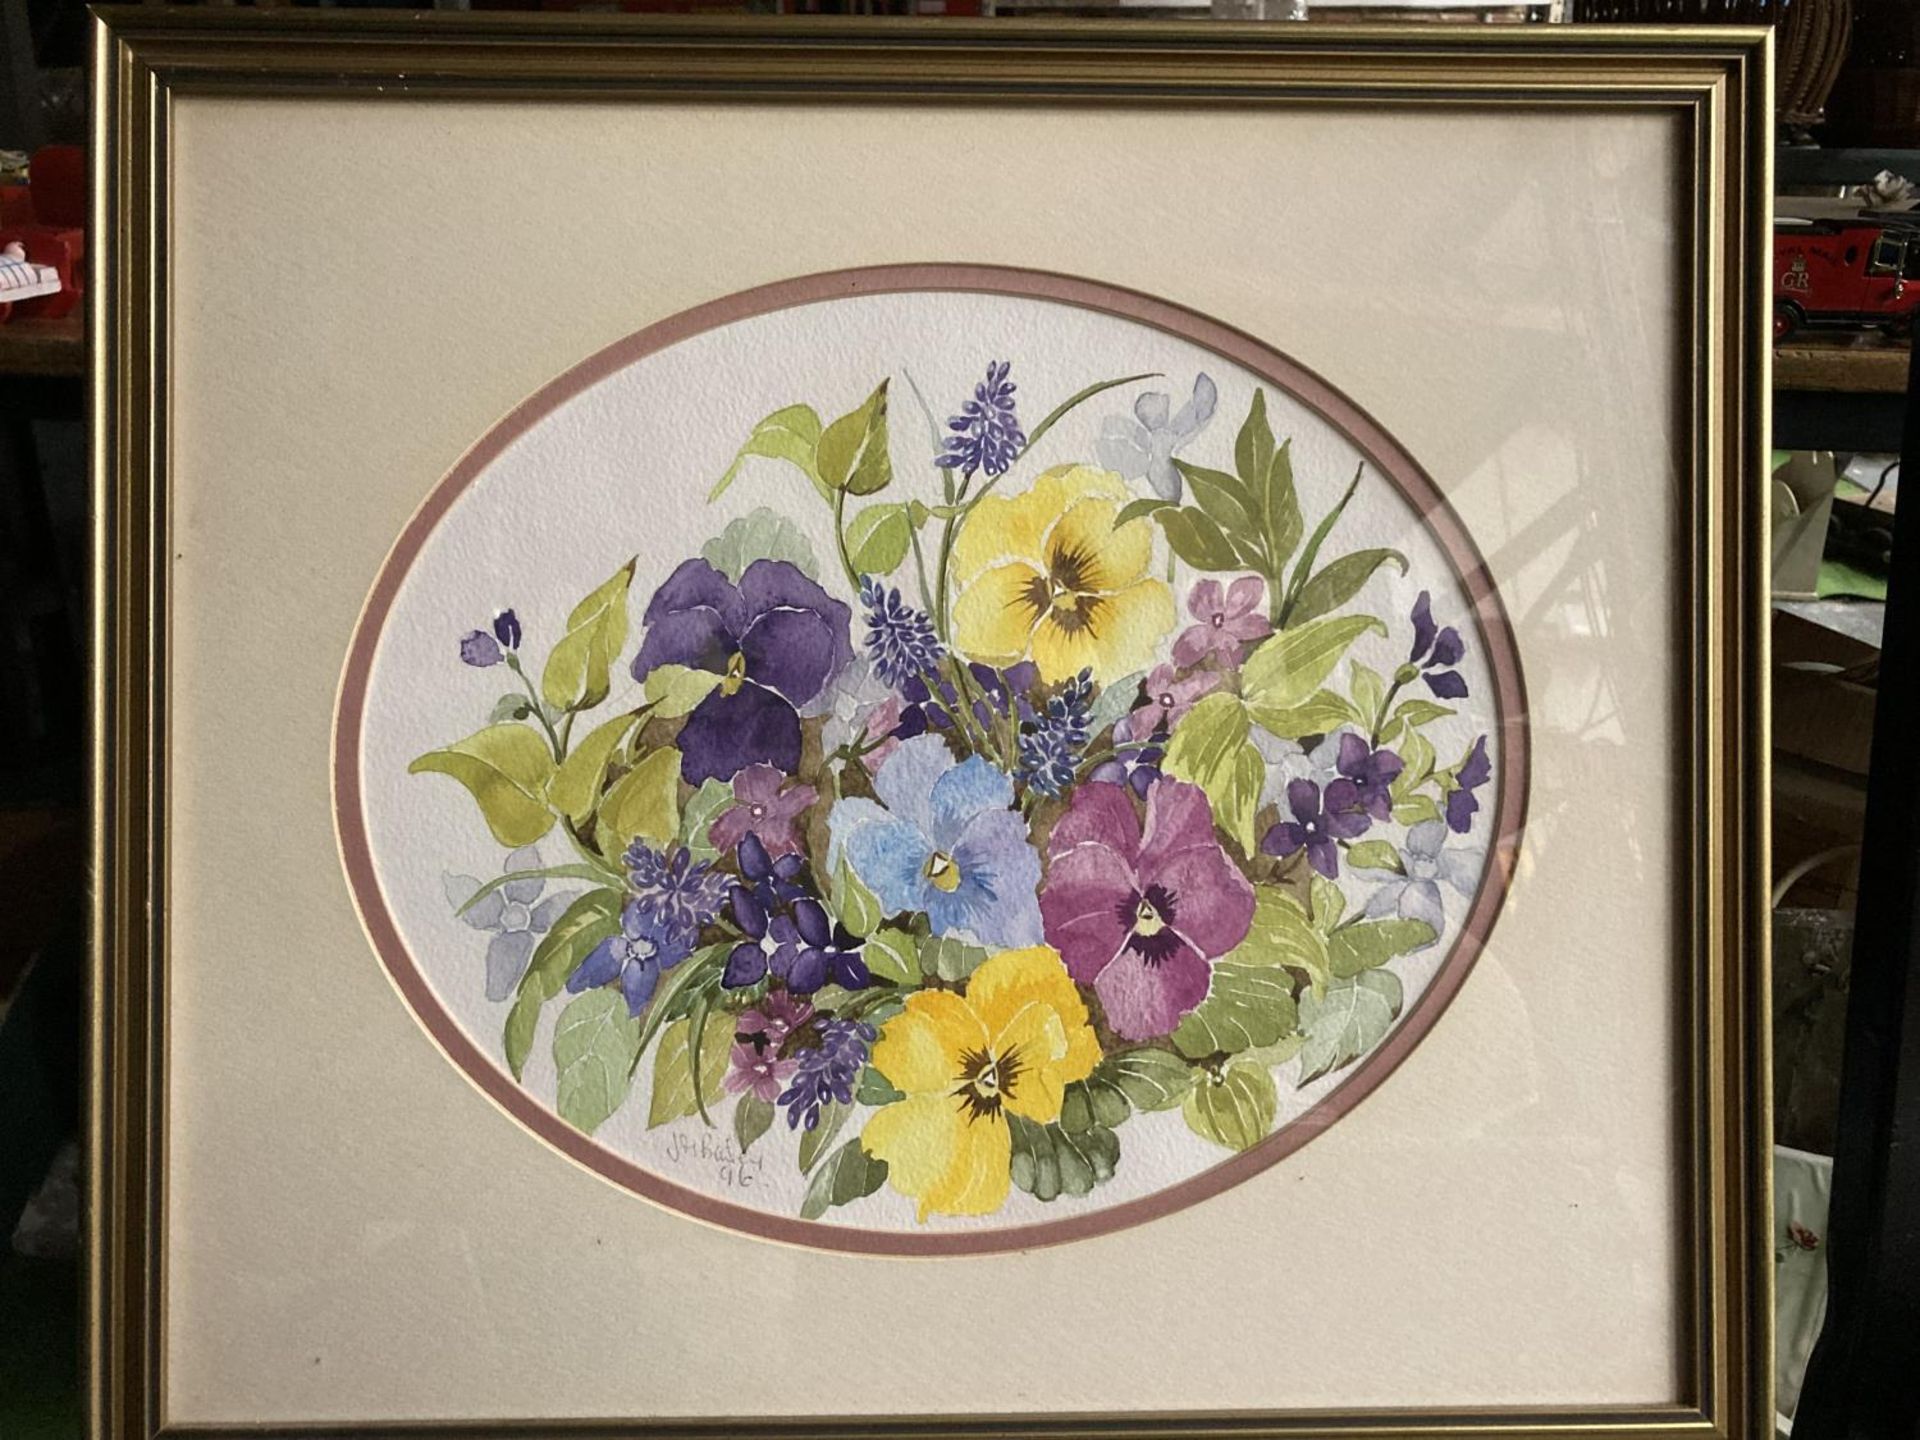 A WATERCOLOUR ON CANVAS OF PANSIES 17 X 15 INCH BY J M BAILEY